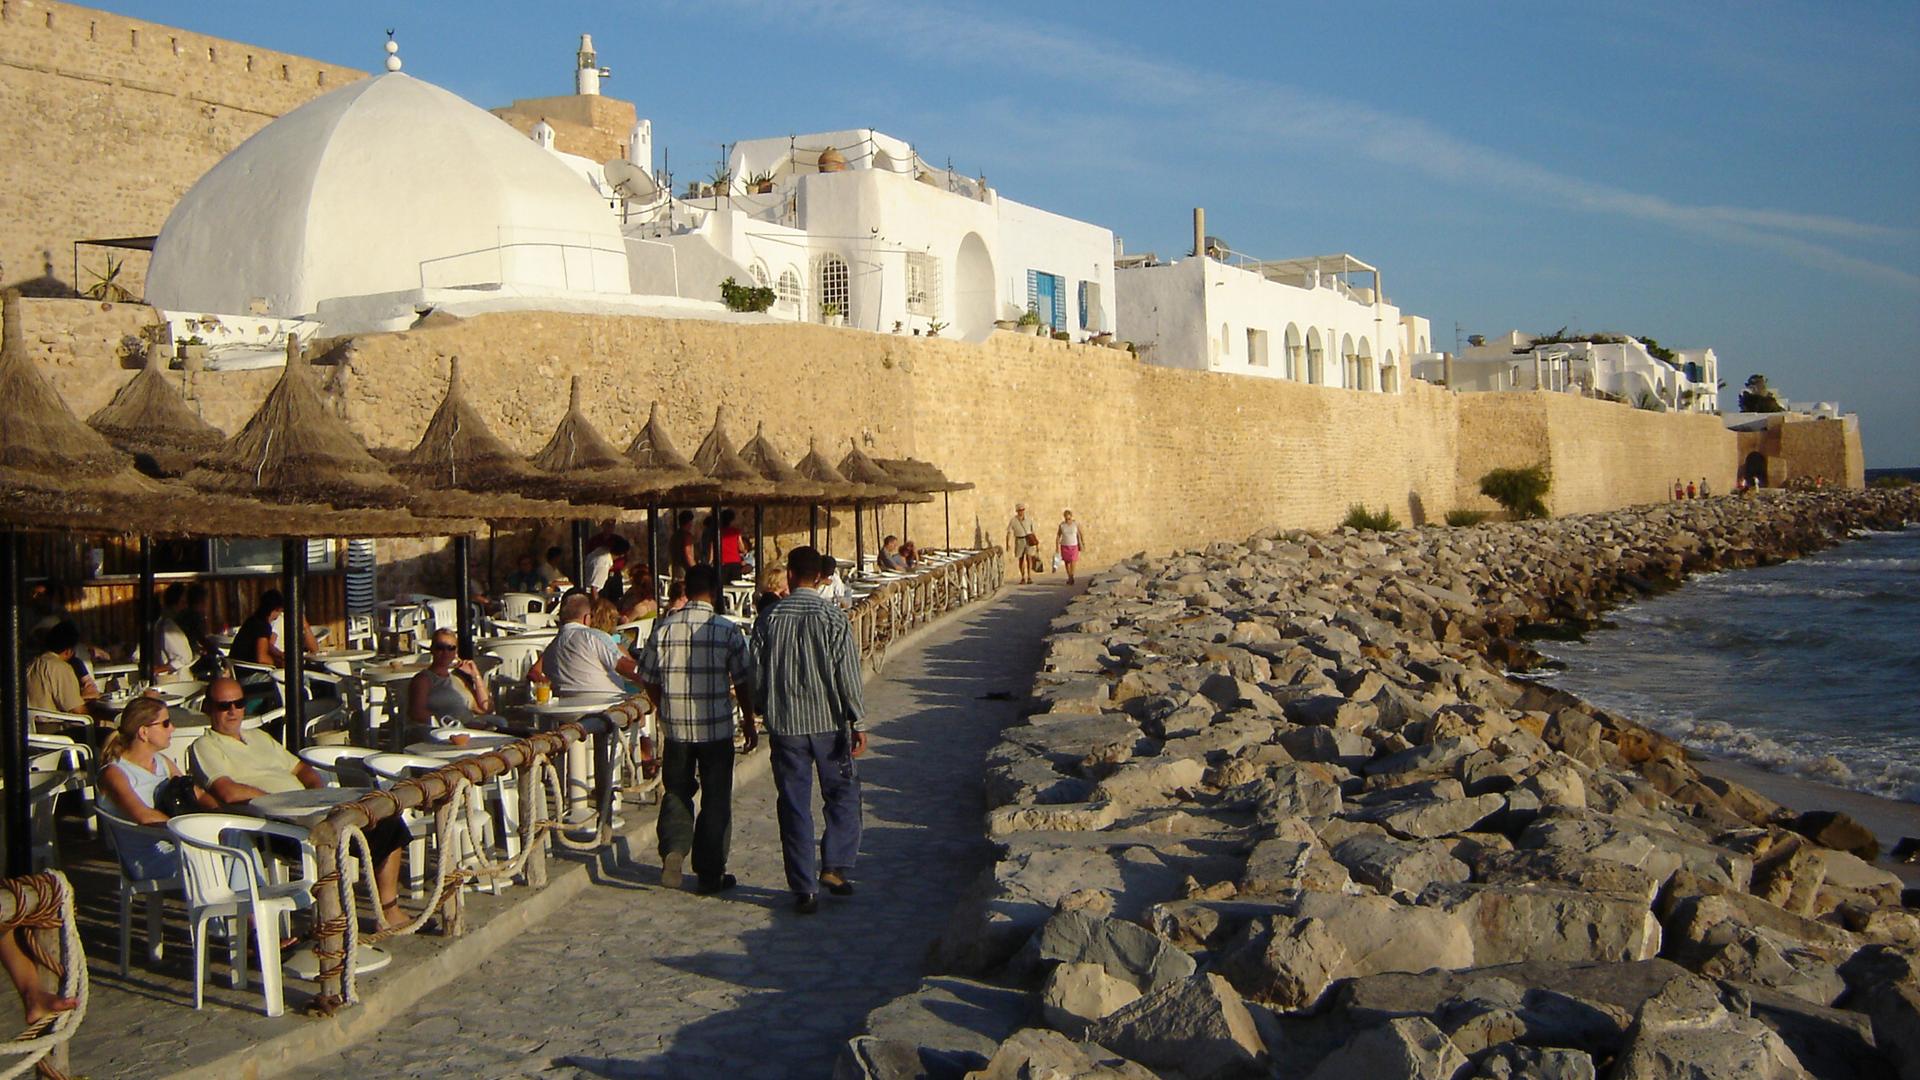 The seaside Tunisia resort of Hammamet is well known for its beaches and nightlife.